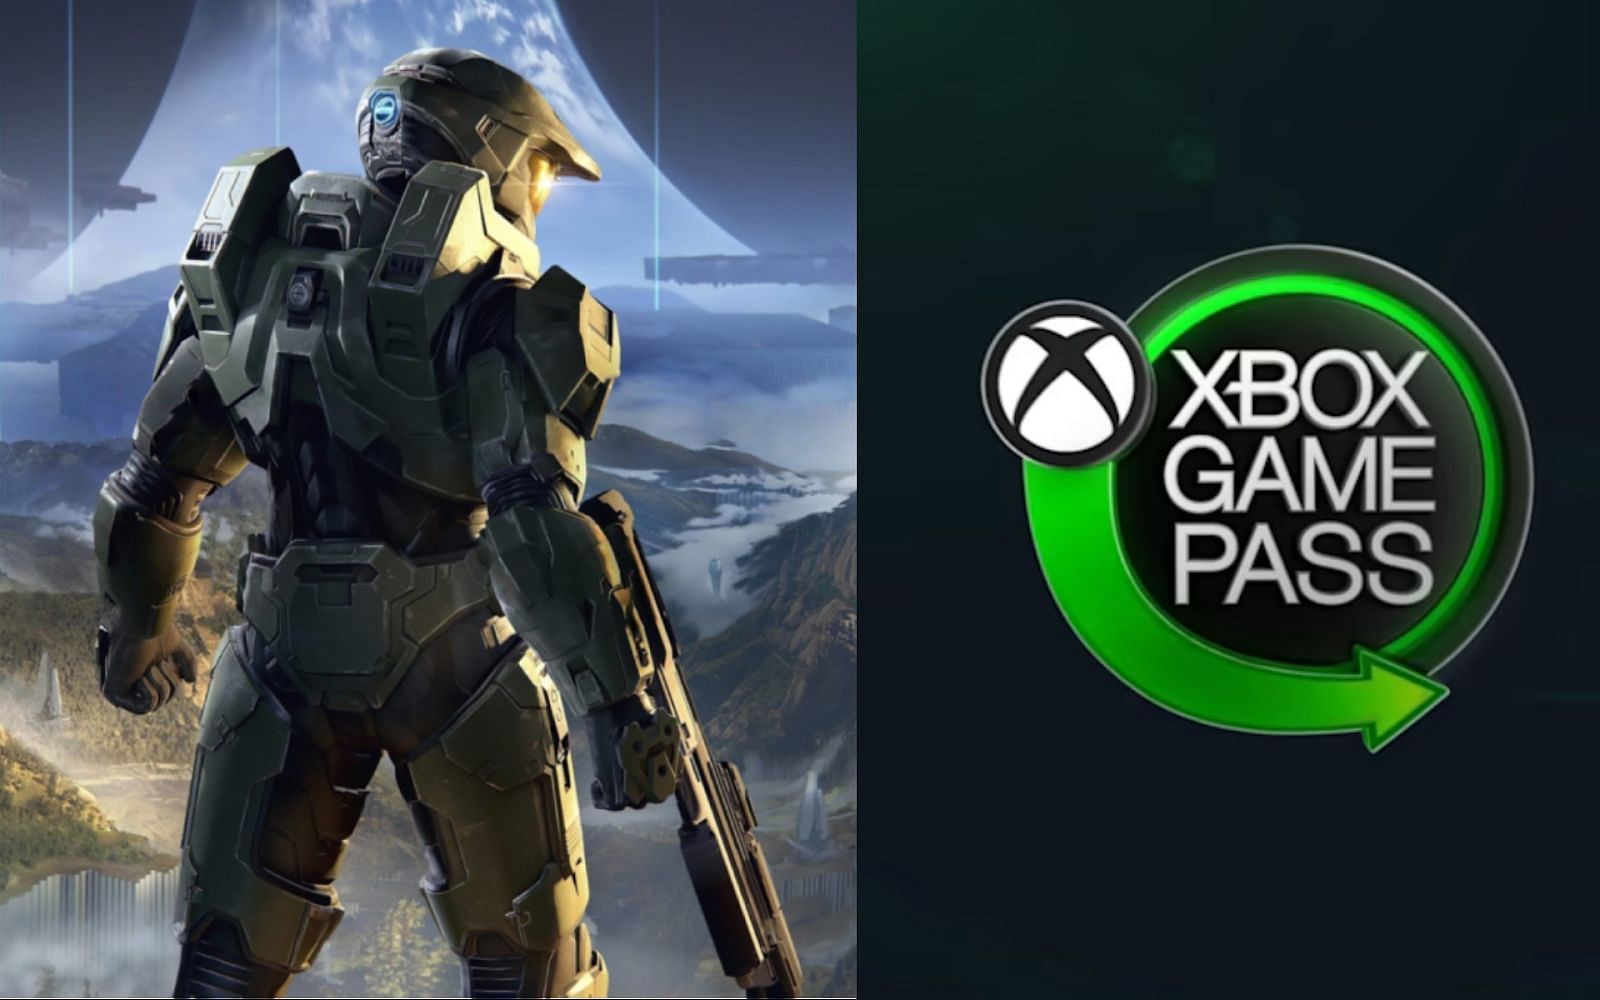 Halo Infinite is coming to Game Pass on Day 1 (Image by Sportskeeda)